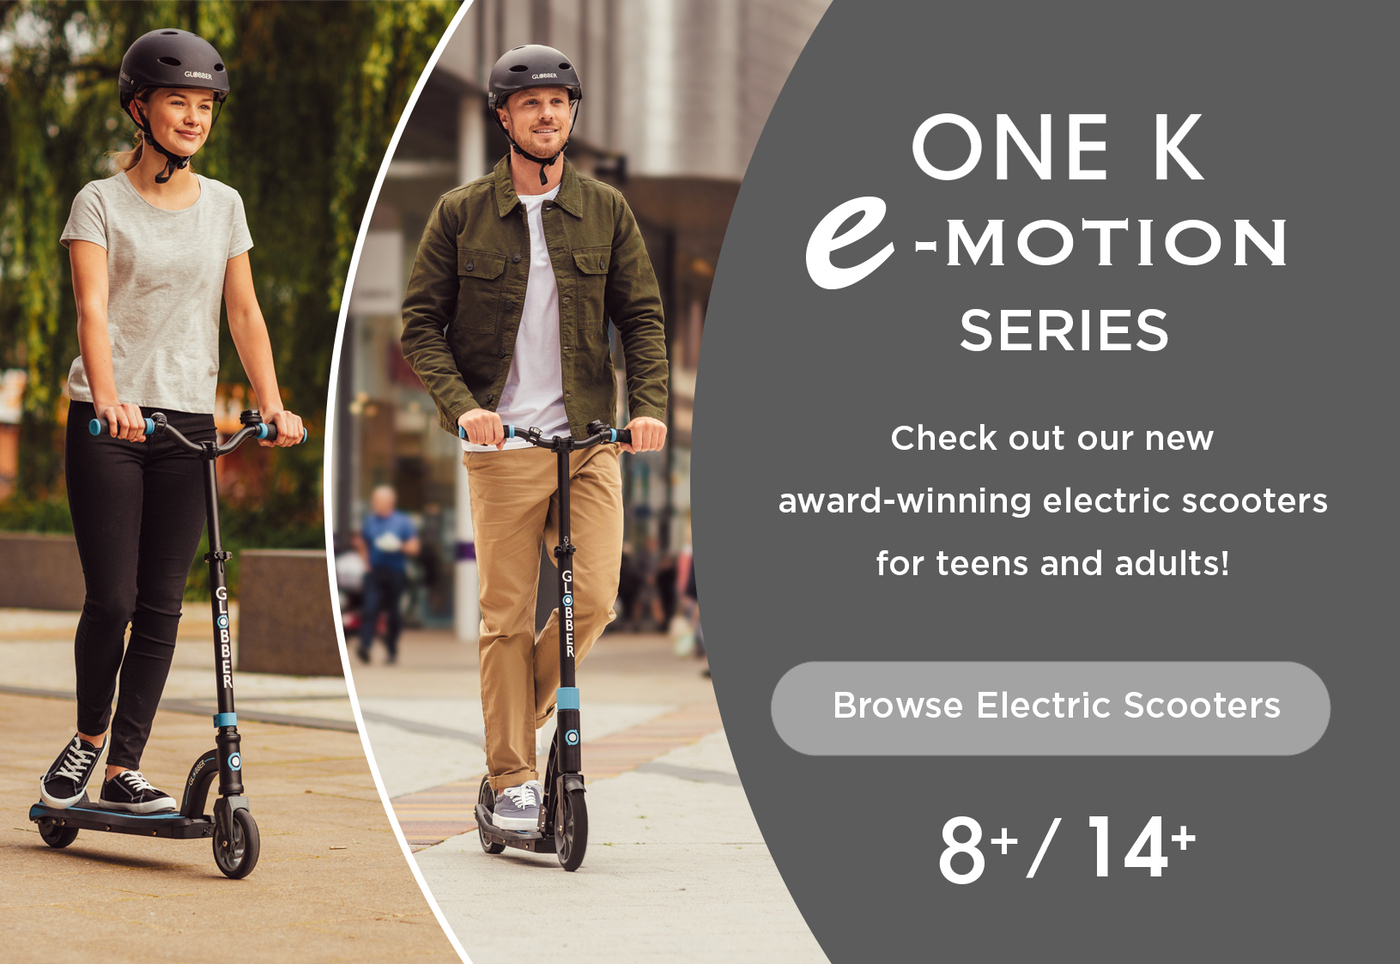 Check out our new award-winning electric scooters for teens and adults!